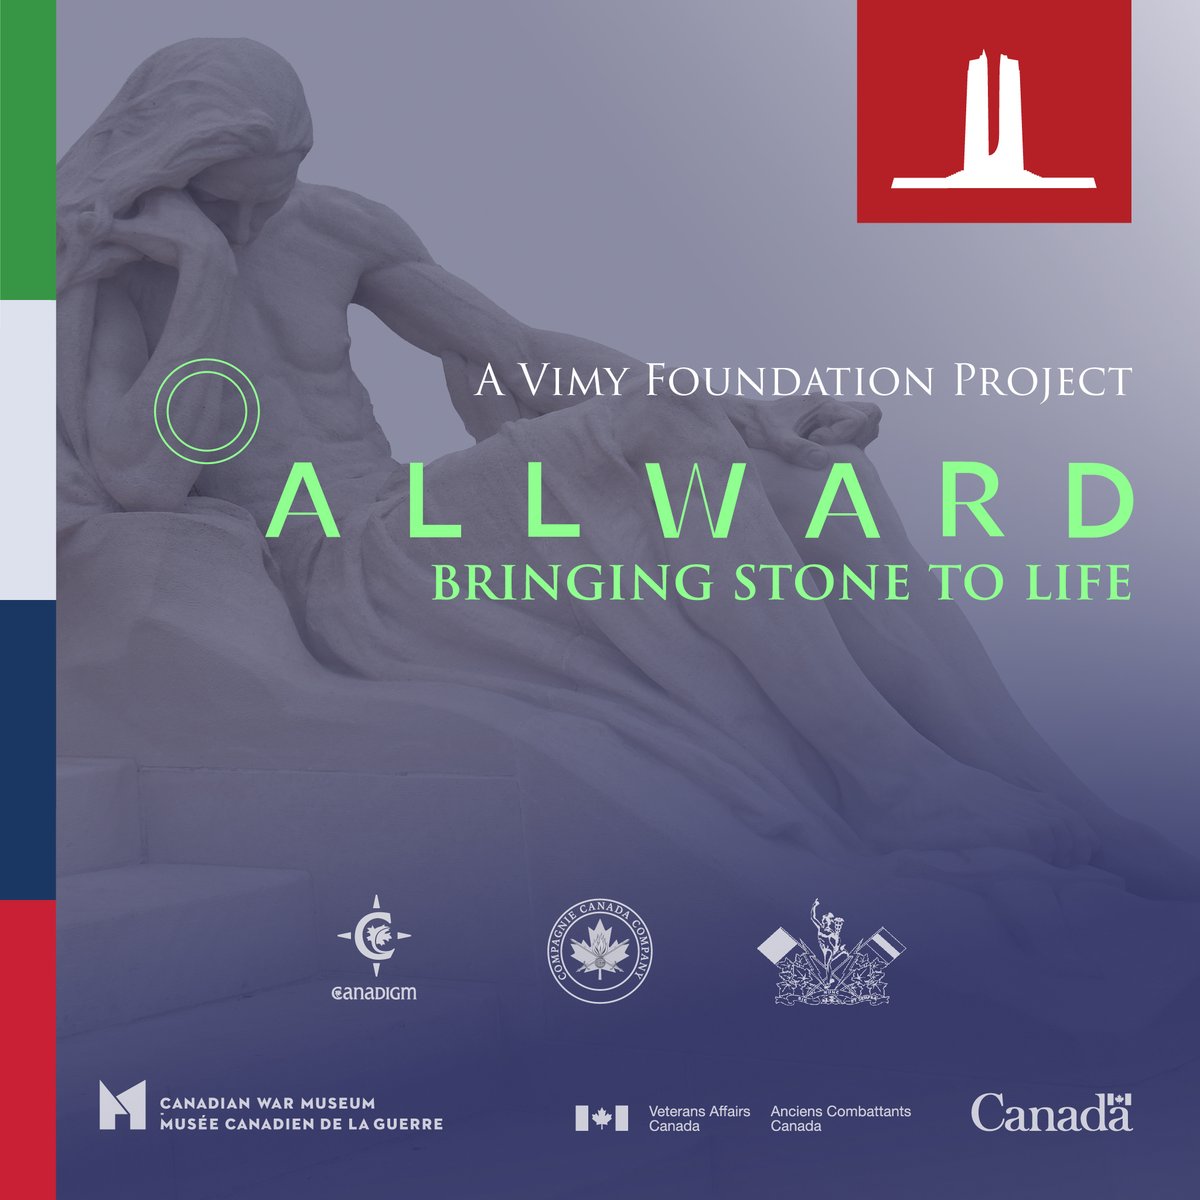 Explore 'Allward: Bringing Stone to Life''. Immerse yourself in the 3D scans of Walter S. Allward's maquettes, the precursors to the Canadian National Vimy Memorial at Allward.vimyfoundation.ca. Experience history in stunning detail!